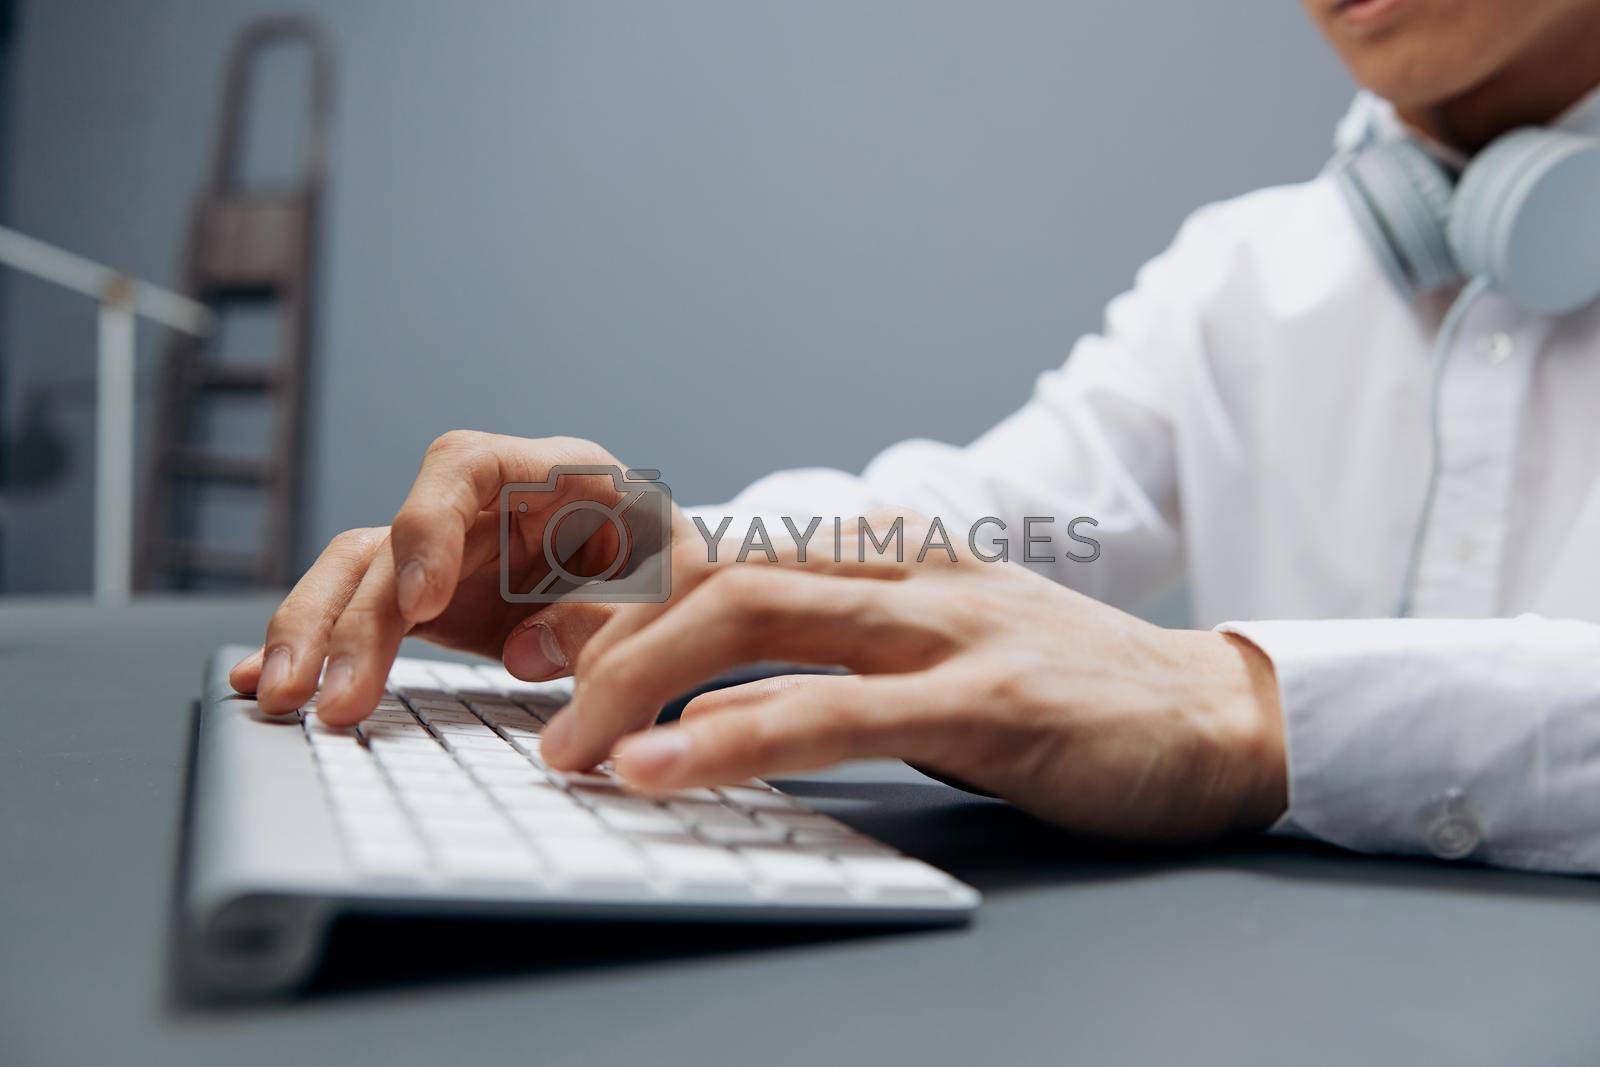 Royalty free image of worker in headphones hands on keyboard office work close-up isolated background by SHOTPRIME